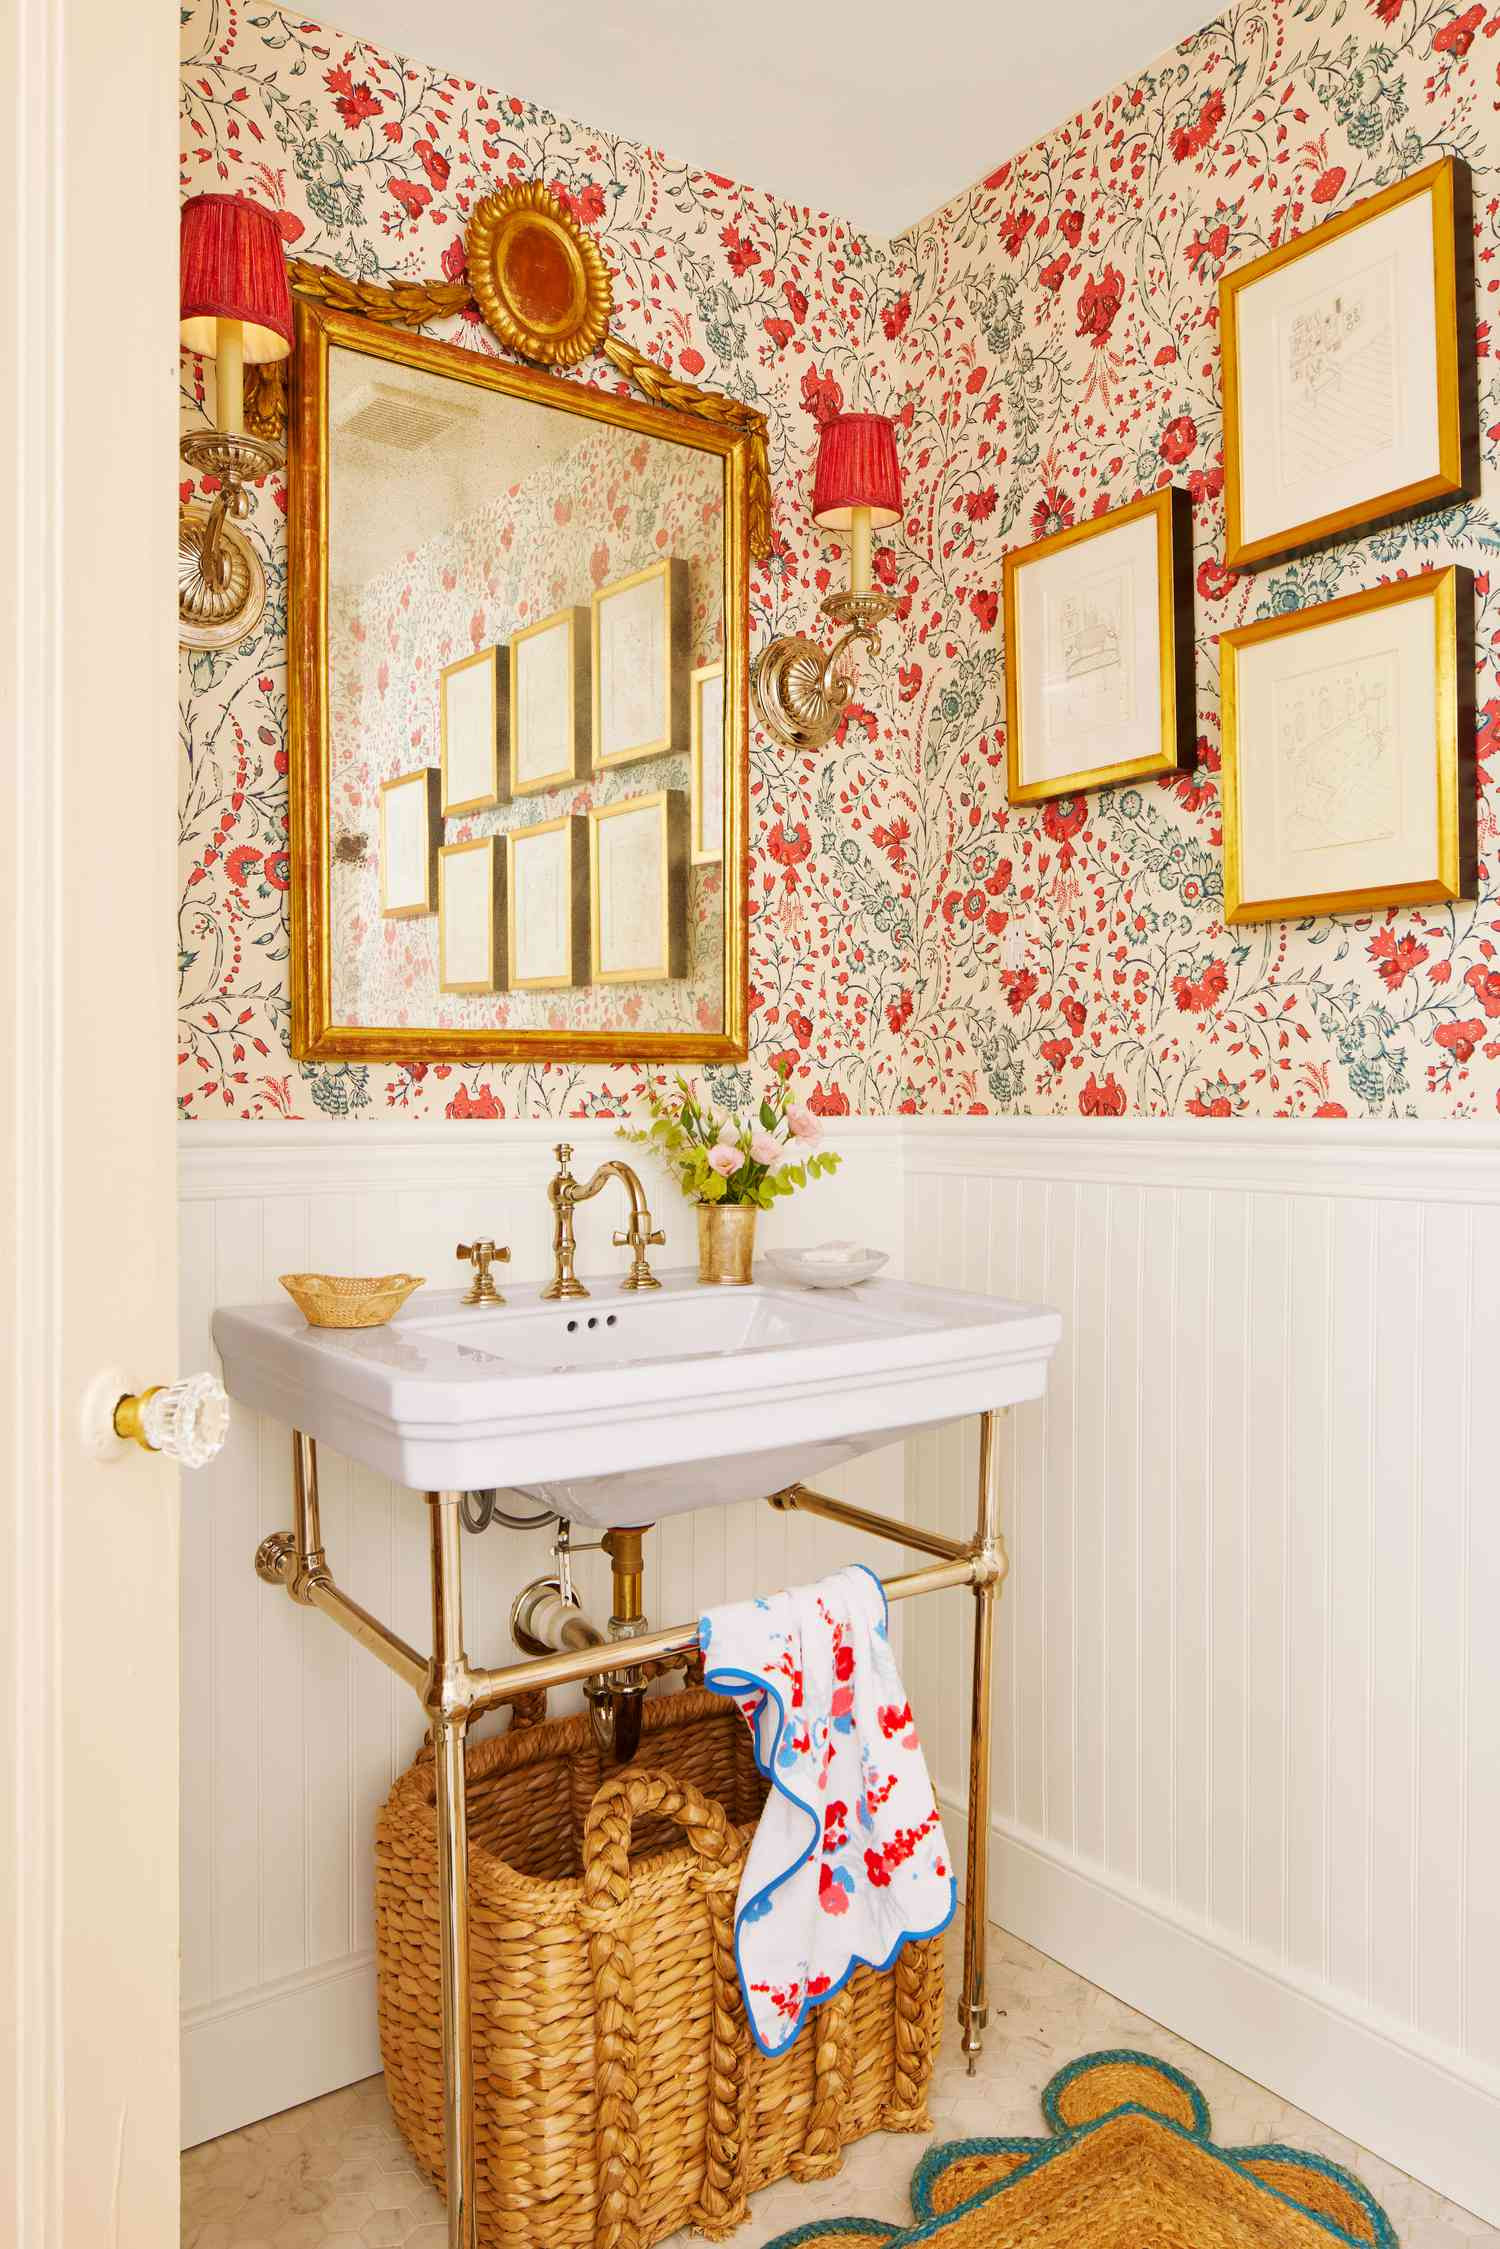 Bathroom Wallpaper Ideas That Will Transform Your Space